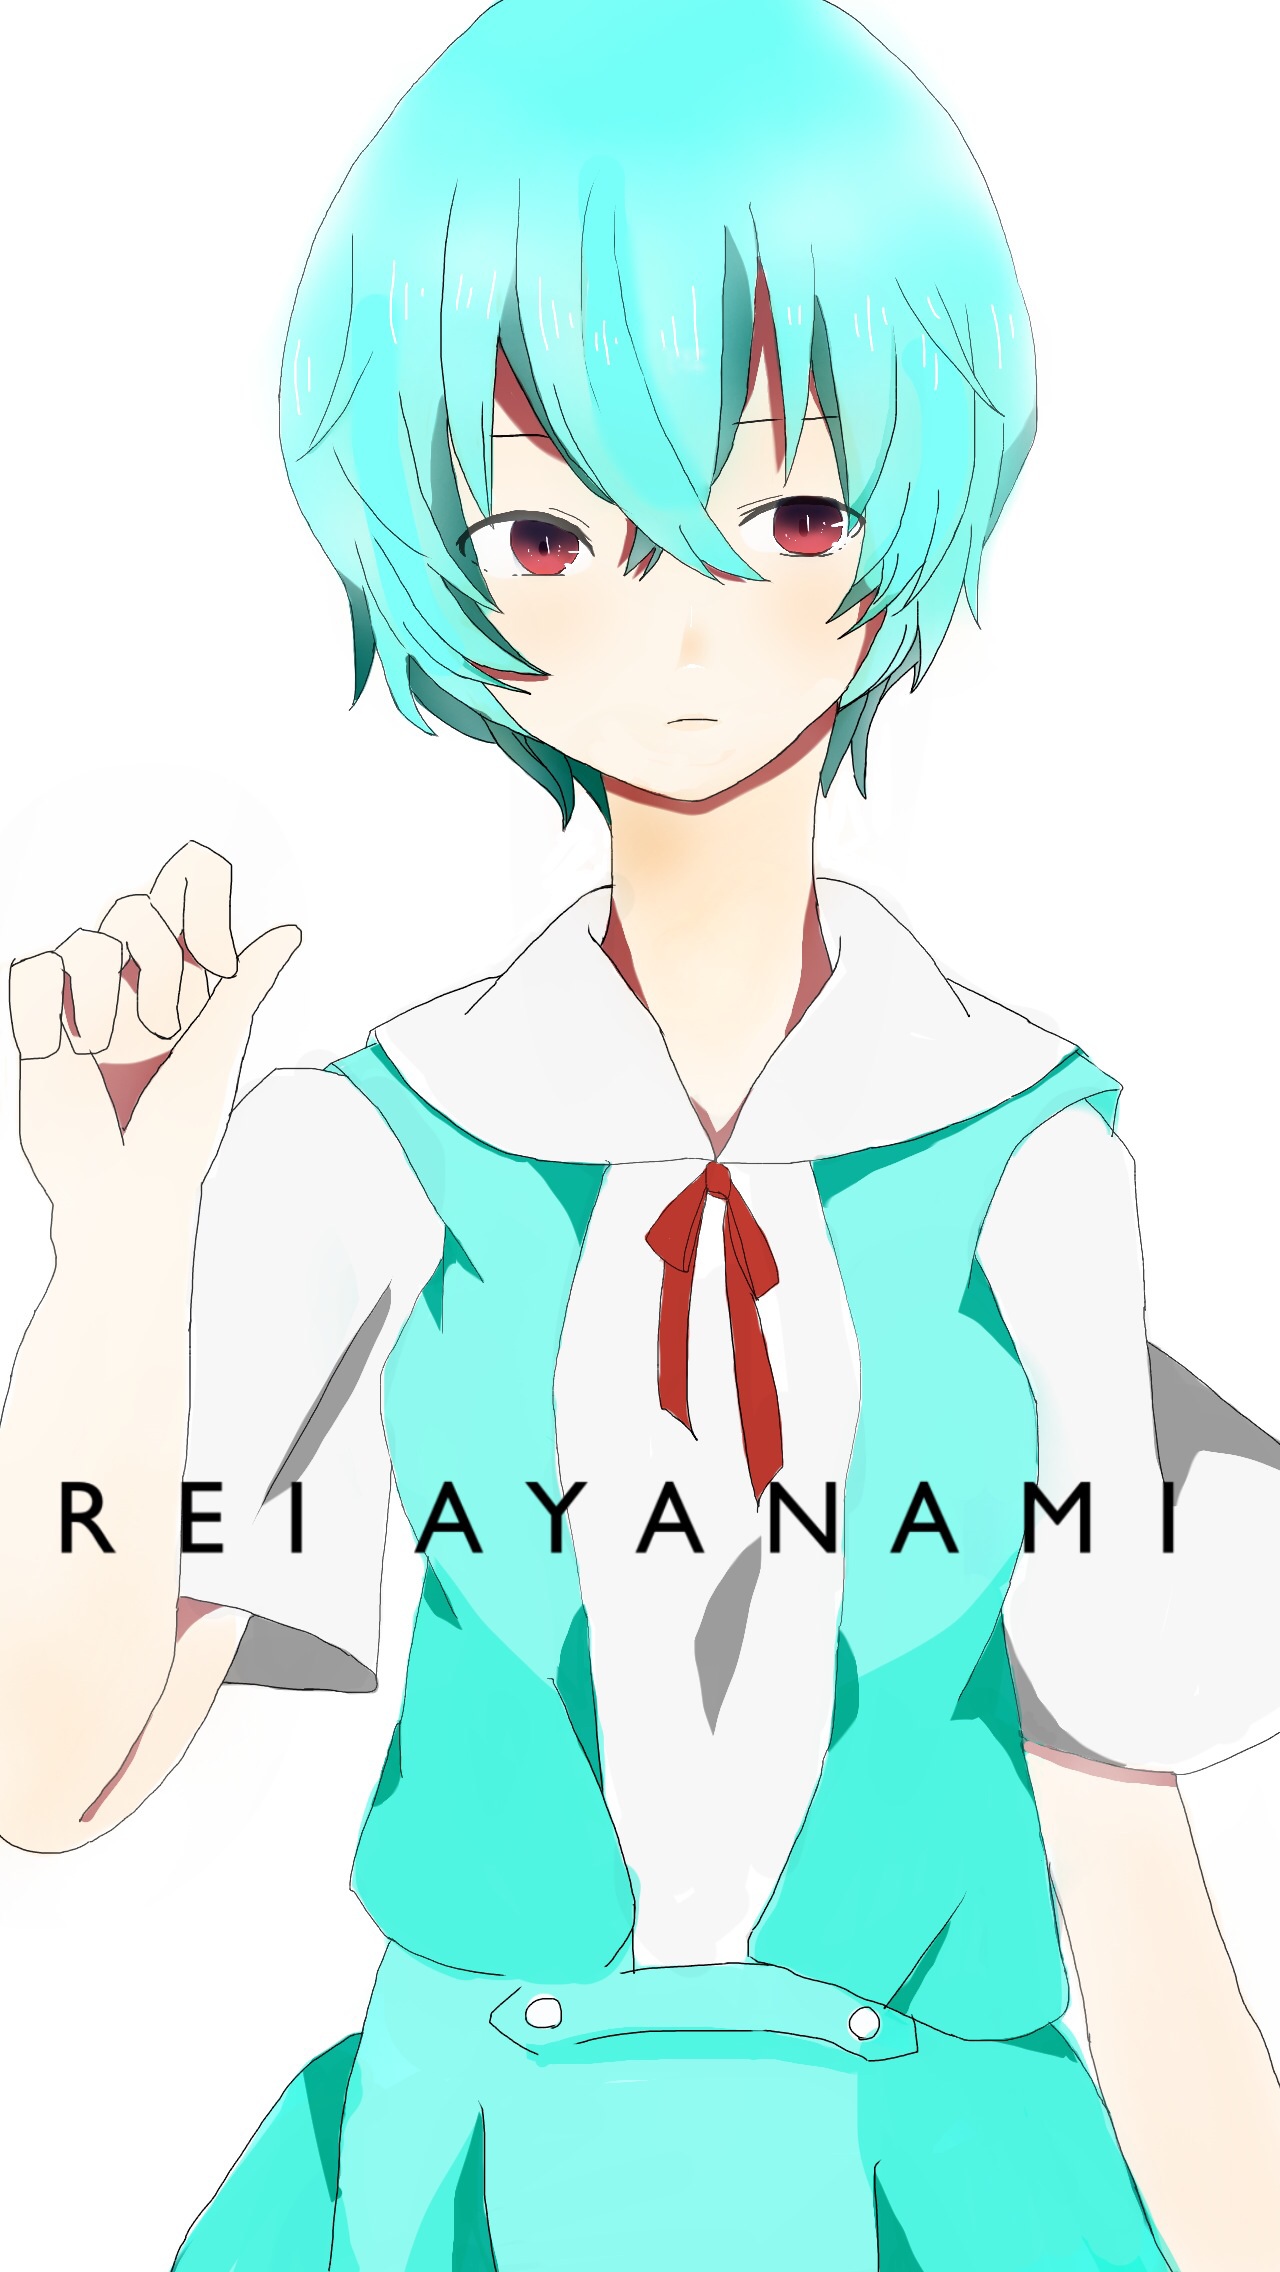 Ayanami Rei by ちょこ